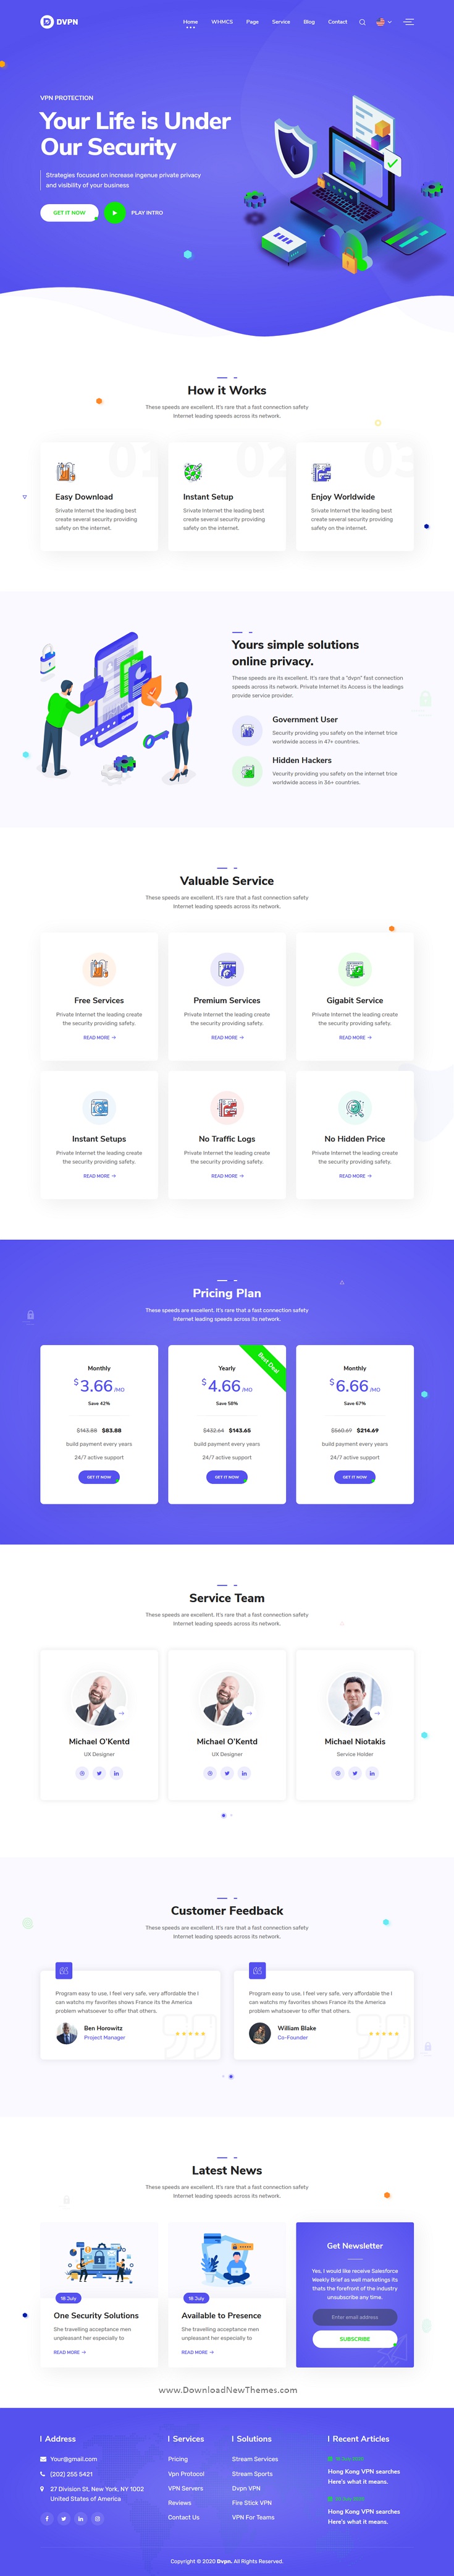 VPN and Cloud Service HTML Template